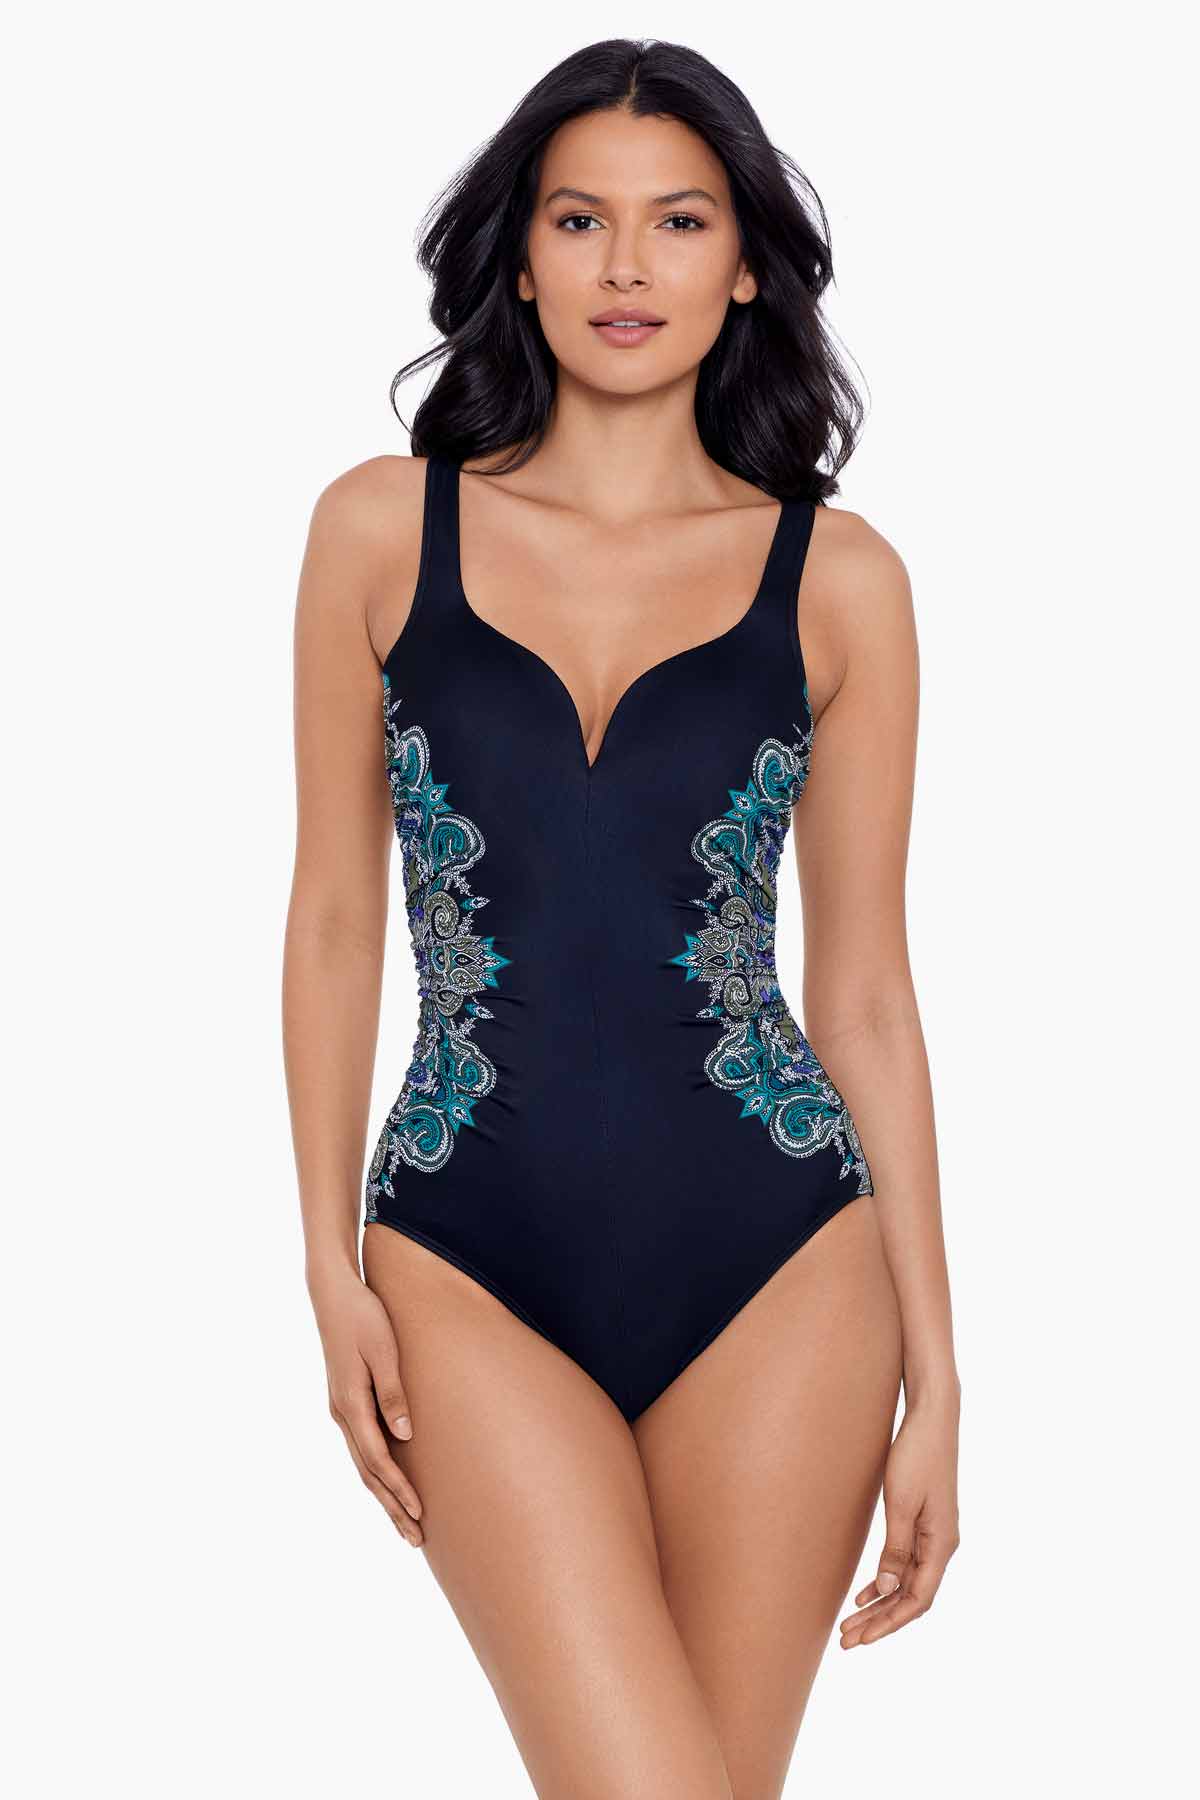 Dreamsuit by Miracle Brands One Piece Swimsuit Sz 12 - Iglesia NEXT